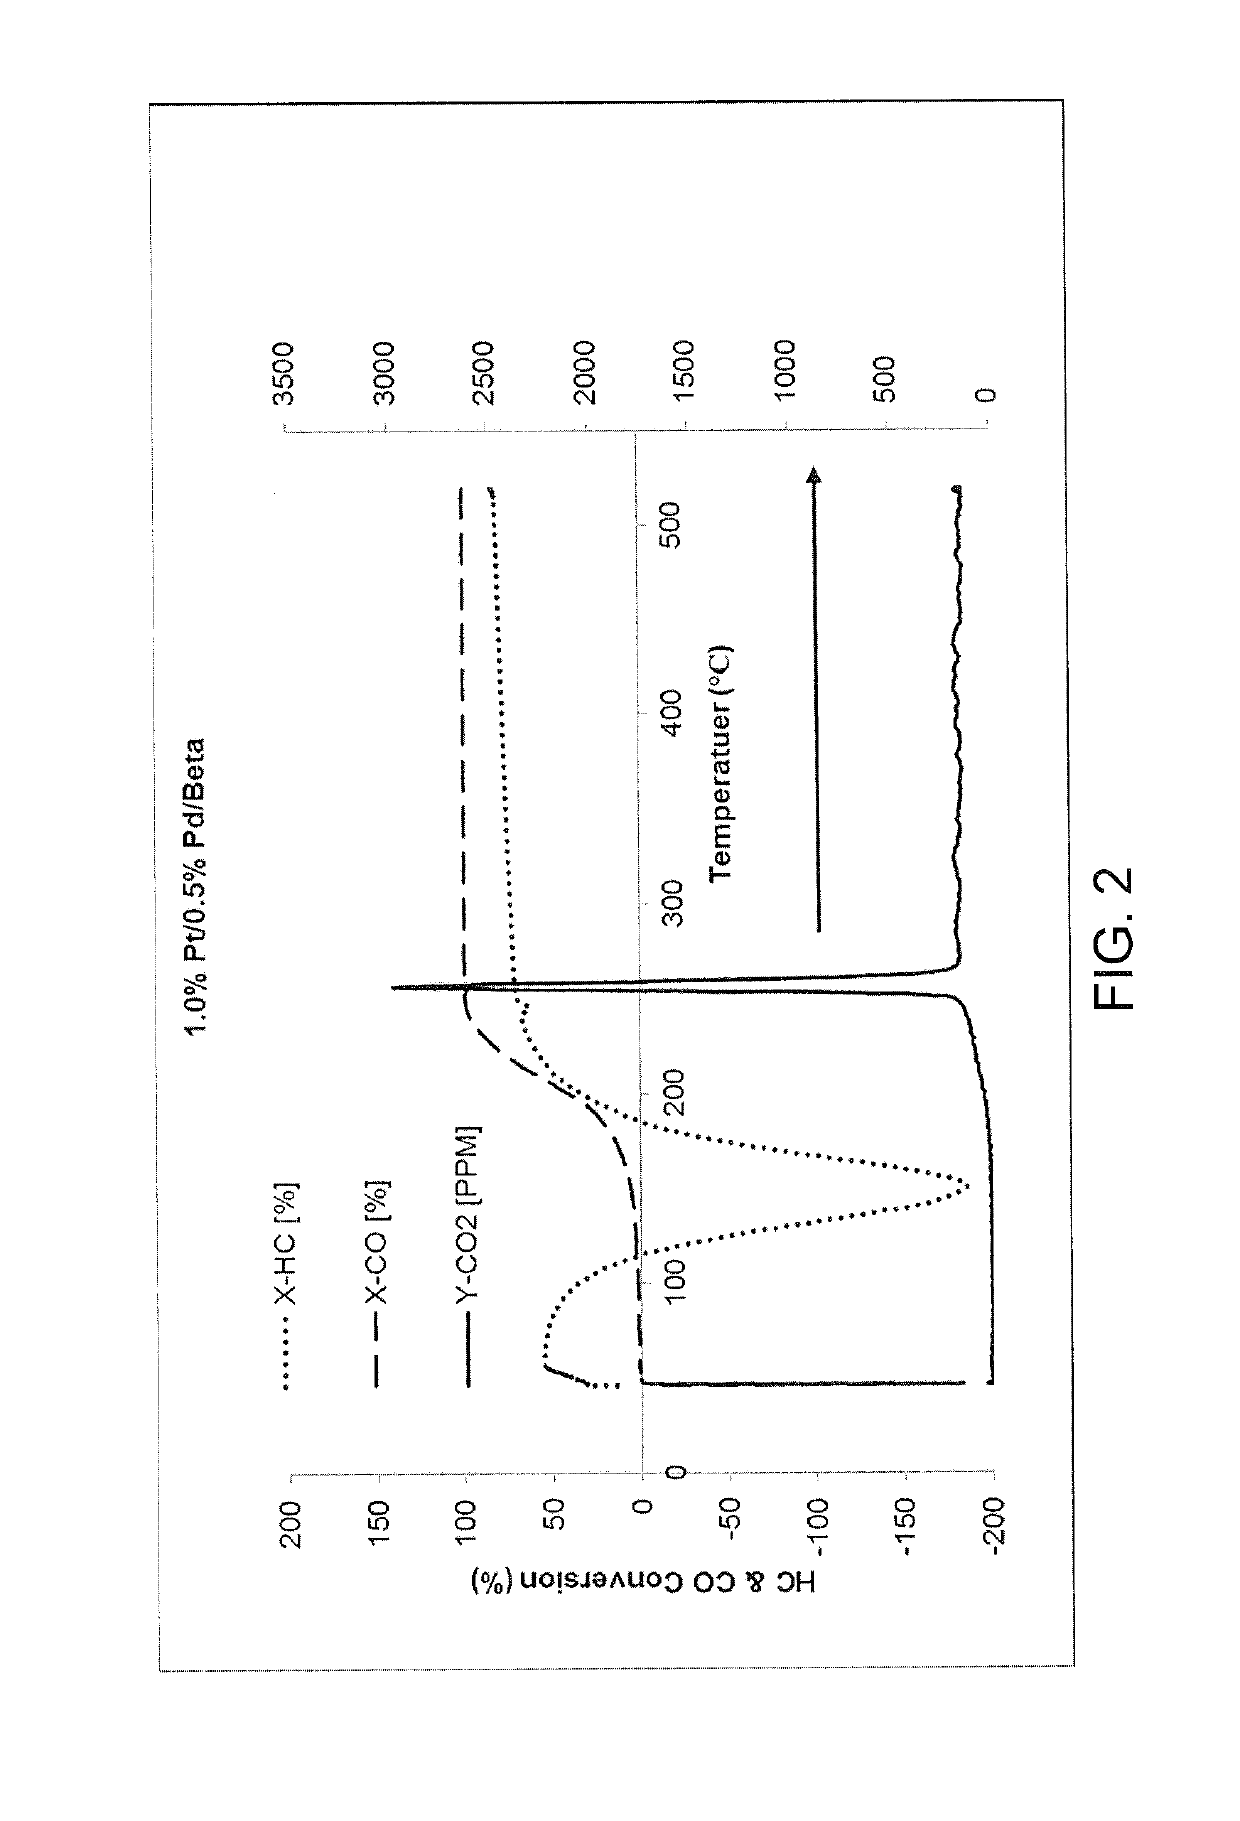 Core/shell hydrocarbon trap catalyst and method of manufacture